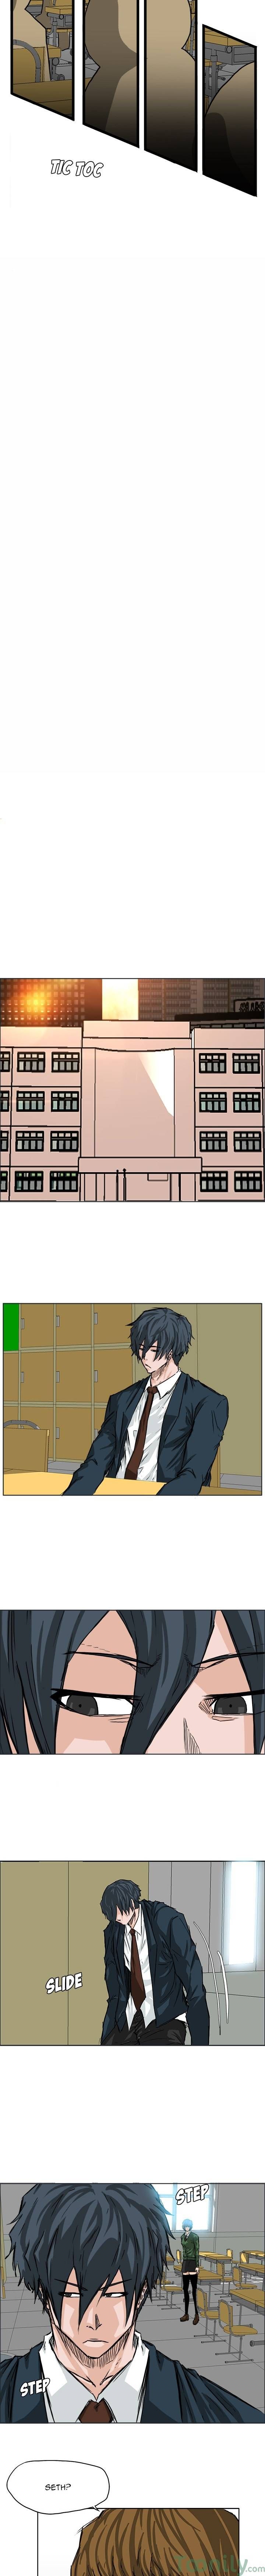 Boss in School Chapter 43 page 2